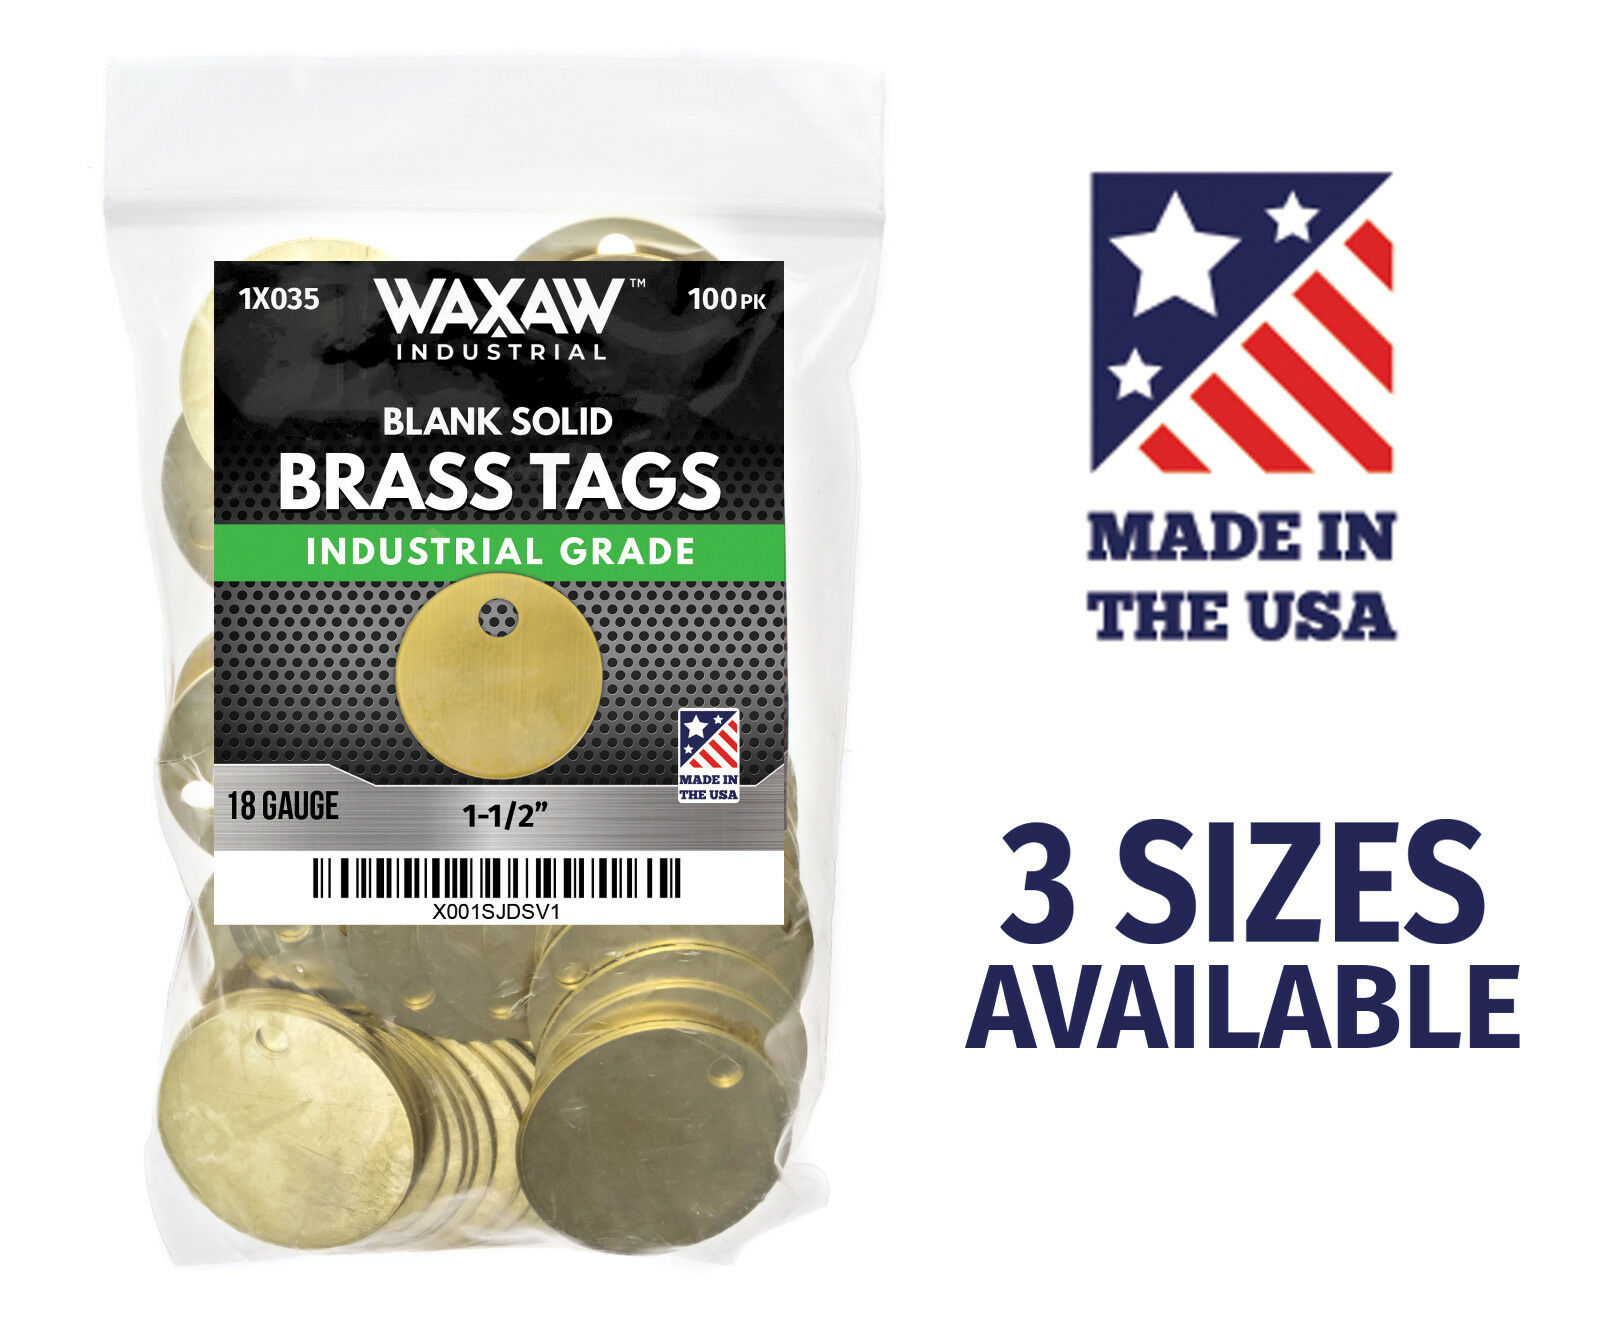 Waxaw Round Solid Blank Brass Id Tags Pets Keys Tools Valves 1", 1-1/4", 1-1/2"